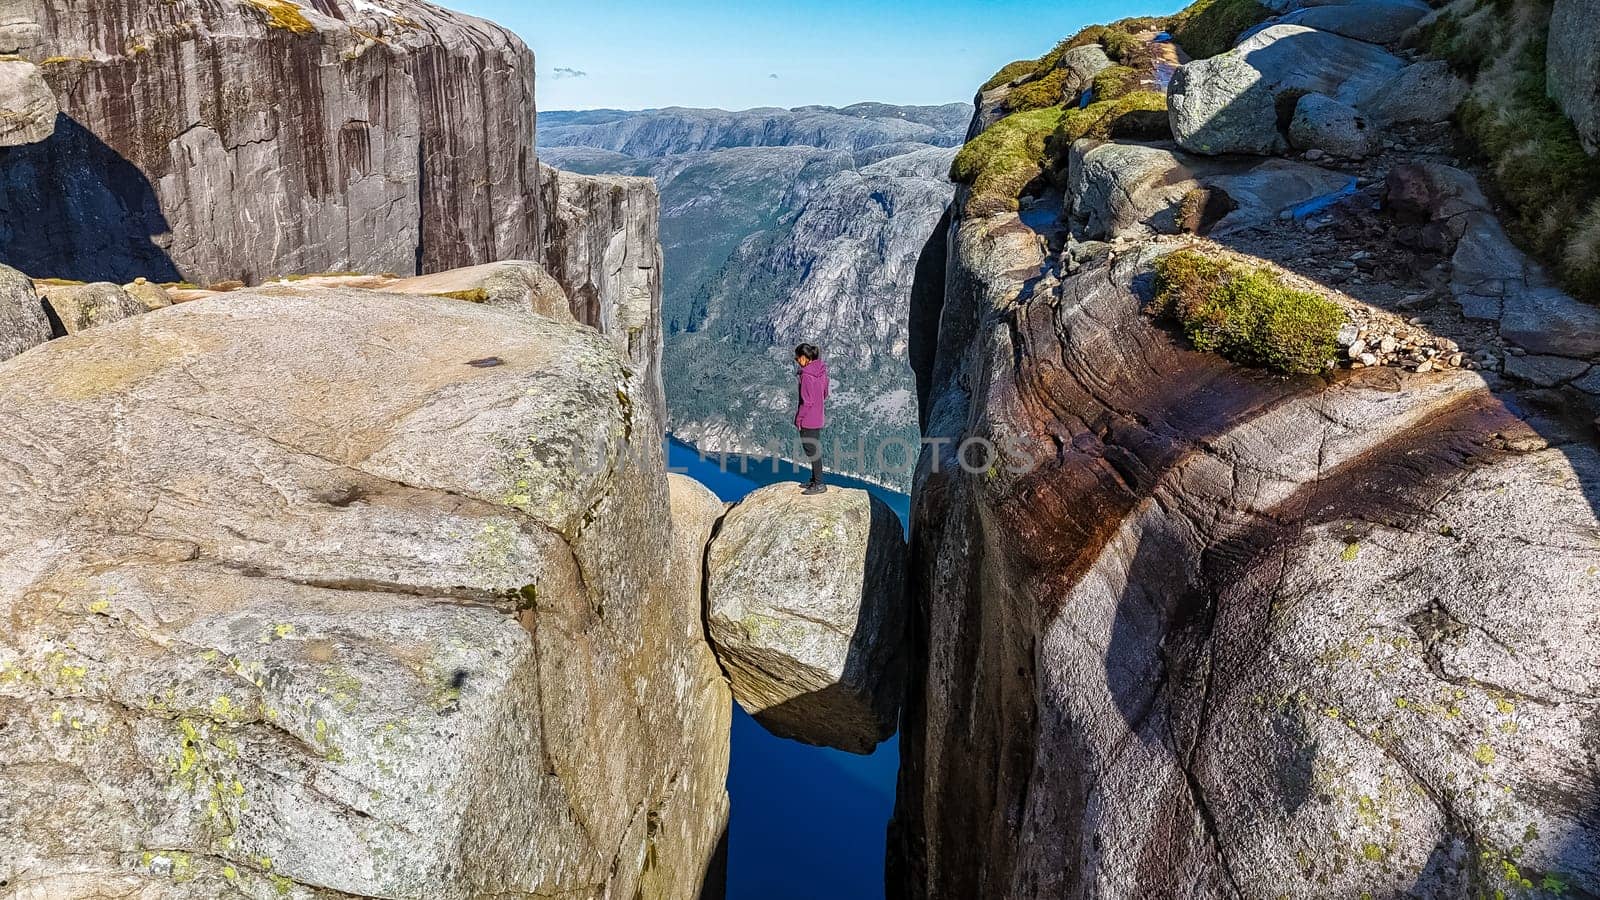 A lone hiker stands on the edge of the iconic Kjeragbolten cliff in Norway, gazing out at the breathtaking landscape below. Asian women visiting Kjeragbolten Norway